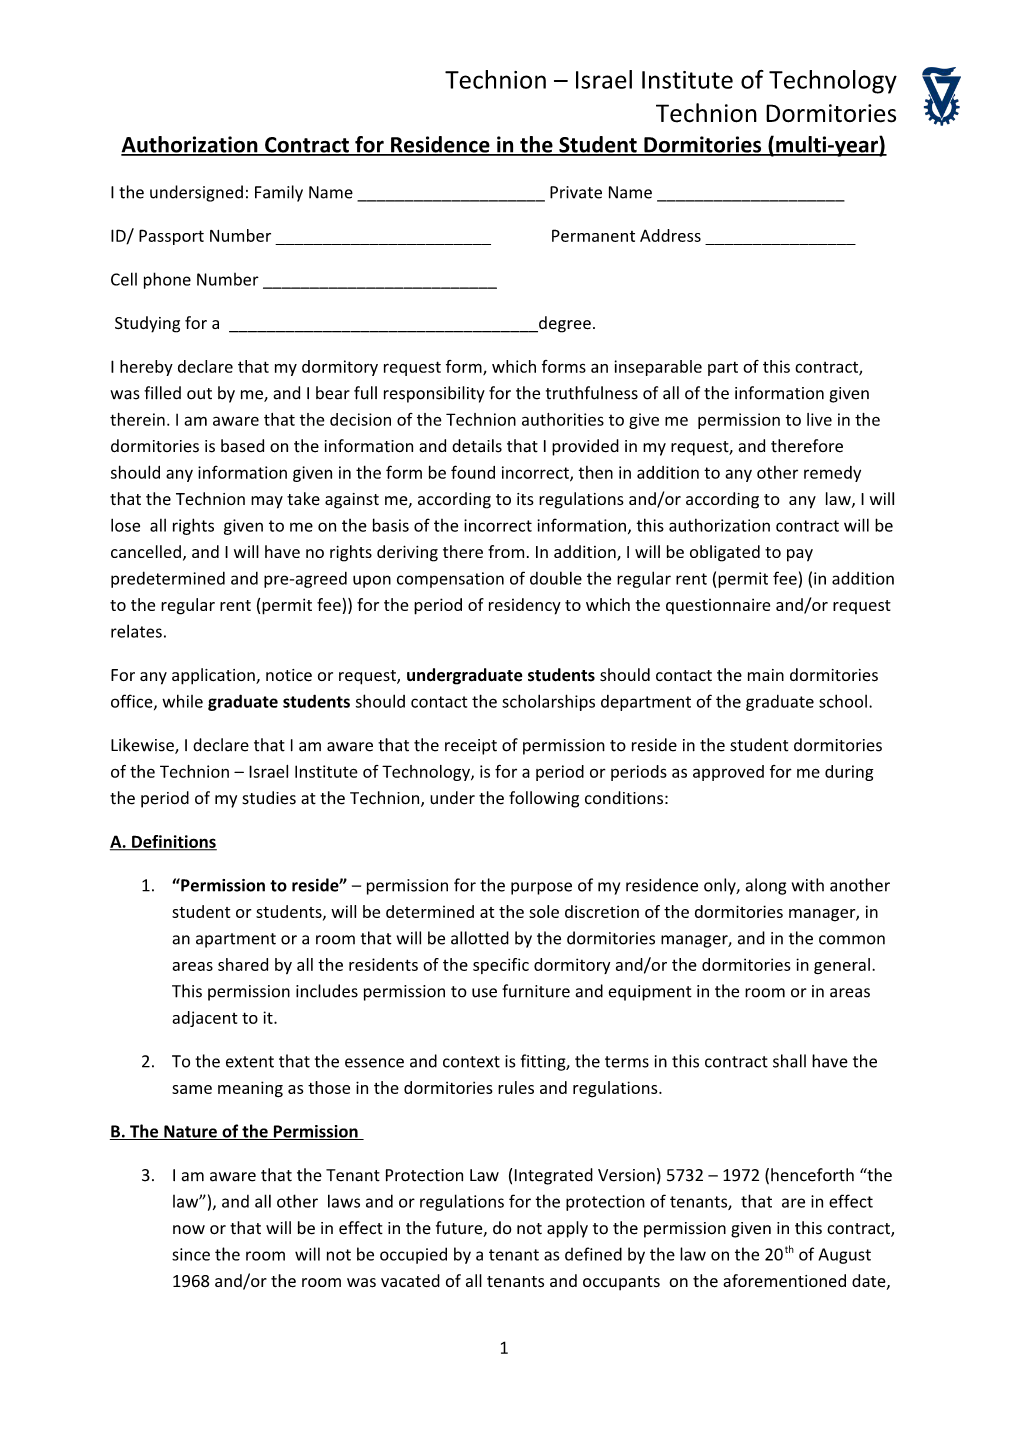 Authorizationcontract for Residence in the Student Dormitories (Multi-Year)